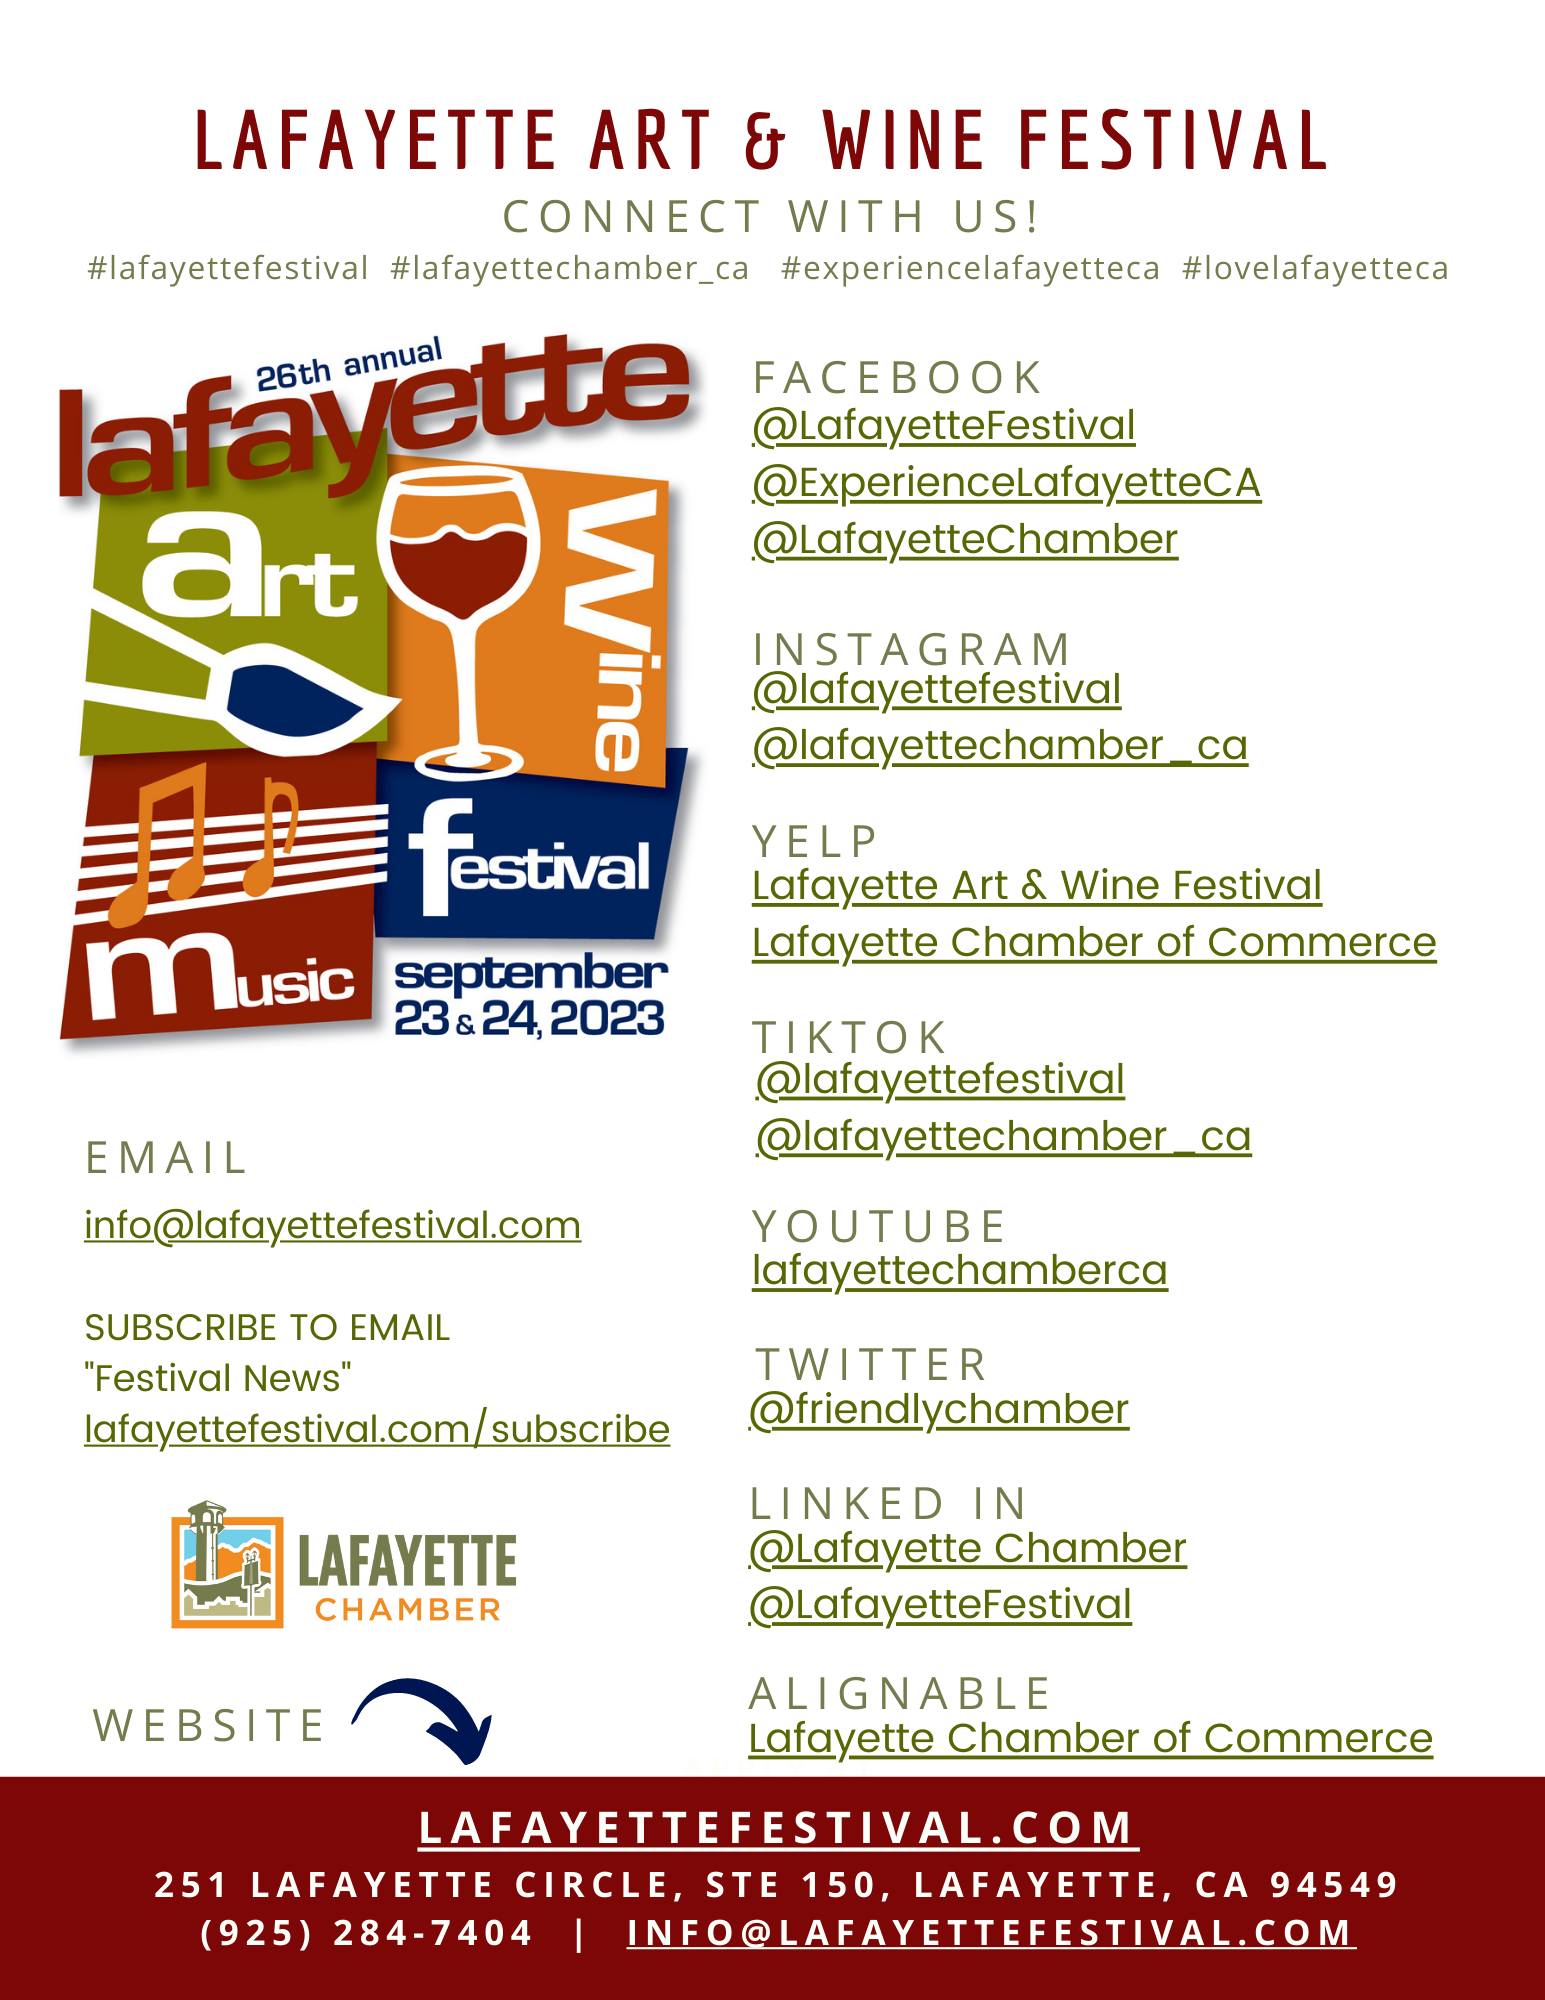 Connect with the Lafayette Art & Wine Festival - Social Media Channels